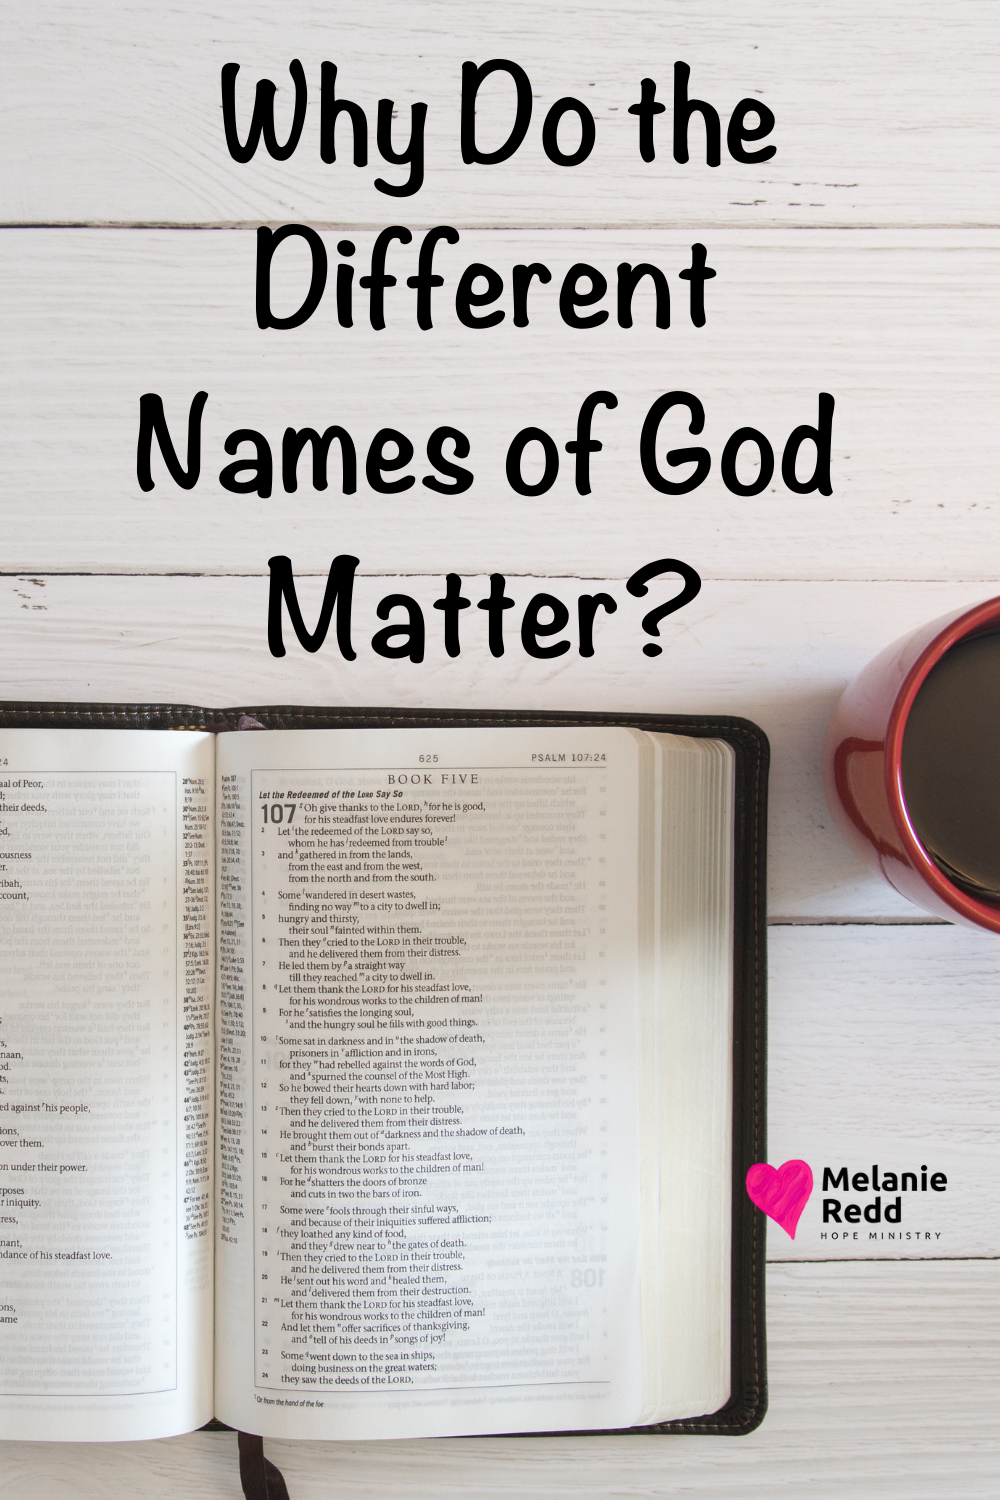 Did you know that there are 100’s of names for God in the Bible? We call him Lord, Shepherd, the Gardener, Almighty, Creator, and Father—just to name a few. Why do the different names of God matter? Drop by today and discover more about God’s names… #namesofgod #godsnames #differentnamesofgod #thename